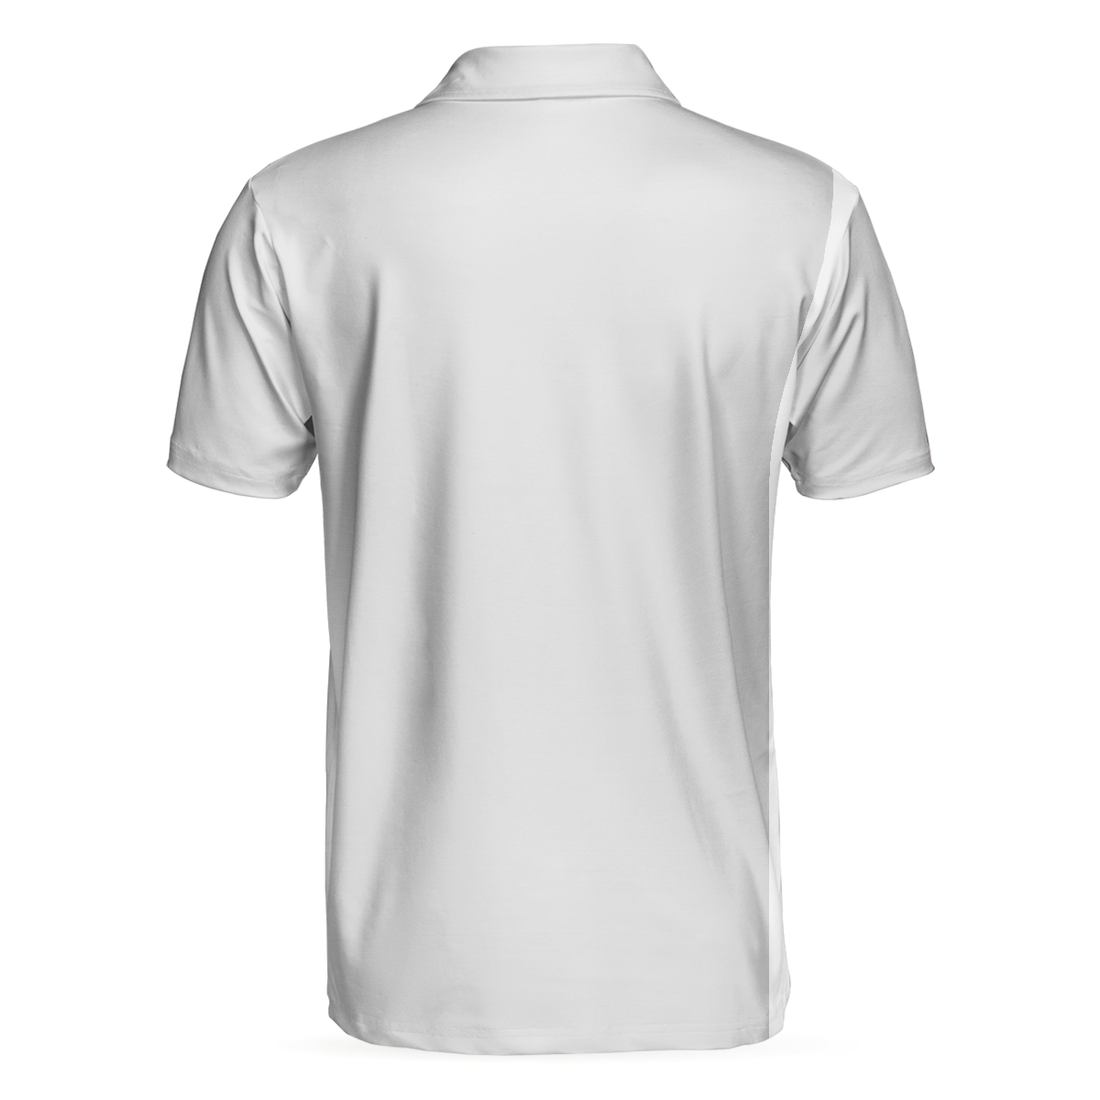 Canadian Golf Flag Polo Shirt Simple Golfing Shirt Design For Canadian Fans Best Male Golf Gift Idea - 1